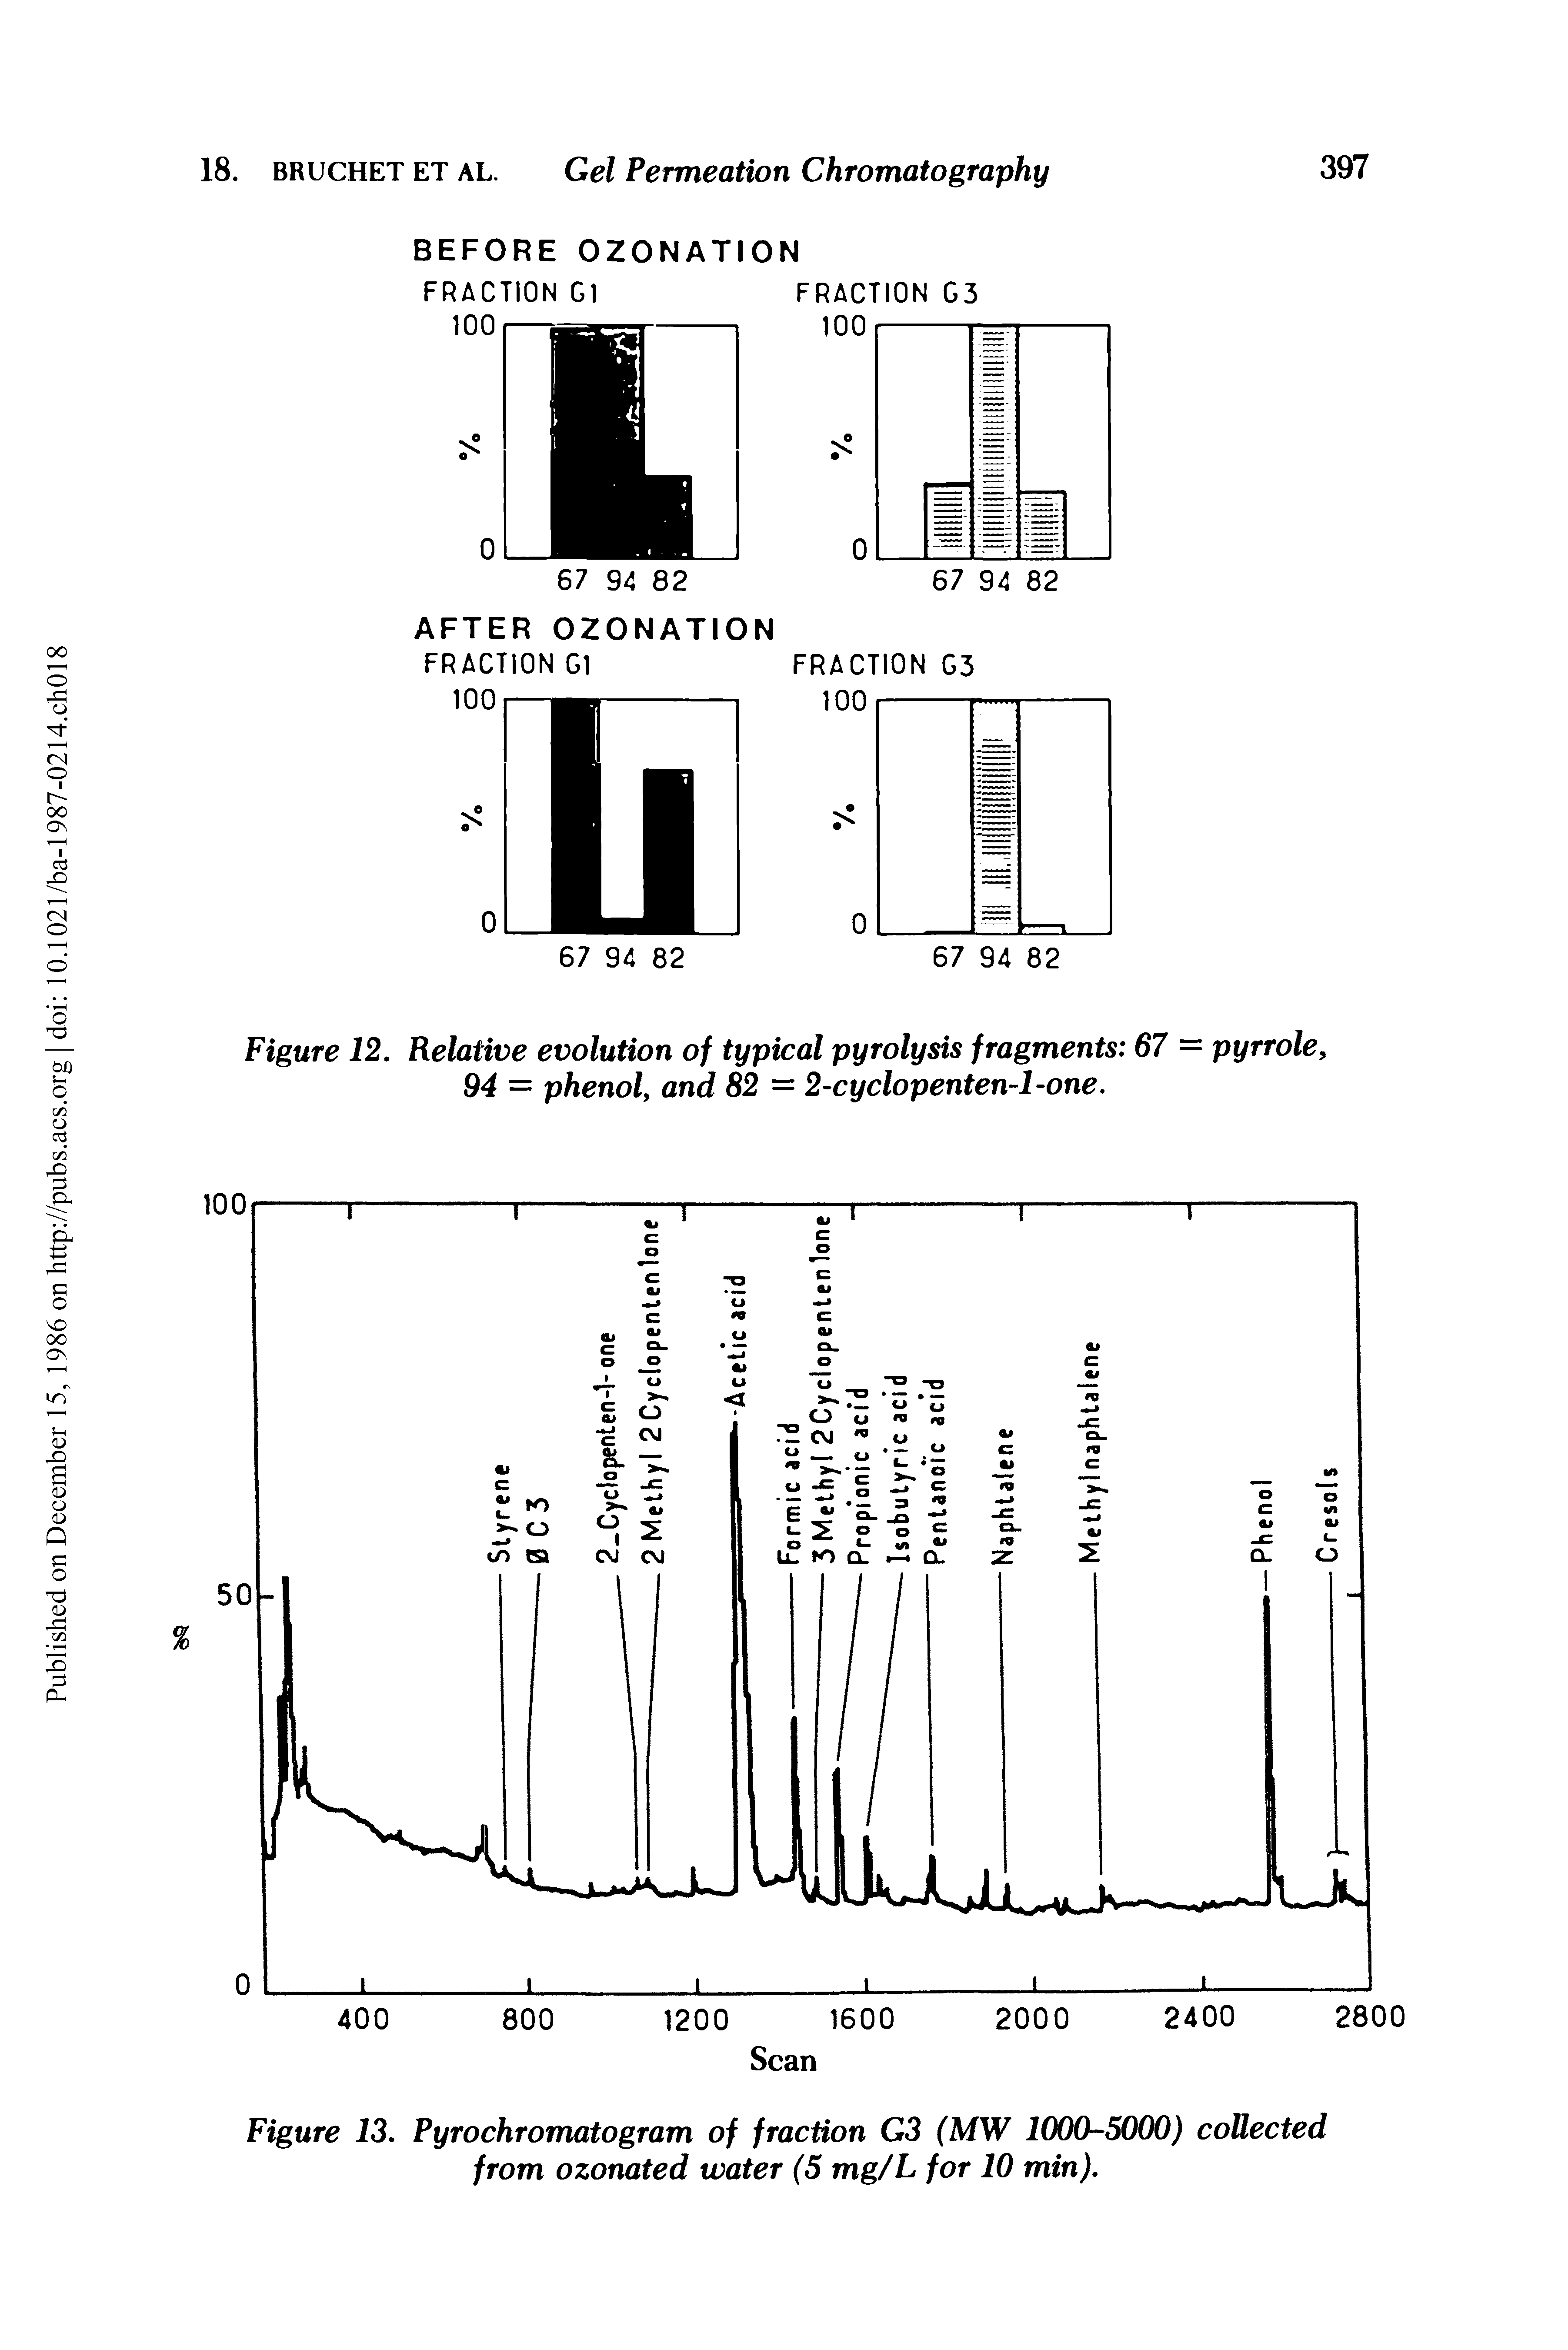 Figure 12. Relative evolution of typical pyrolysis fragments 67 = pyrrole, 94 = phenol, and 82 = 2-cyclopenten l-one.